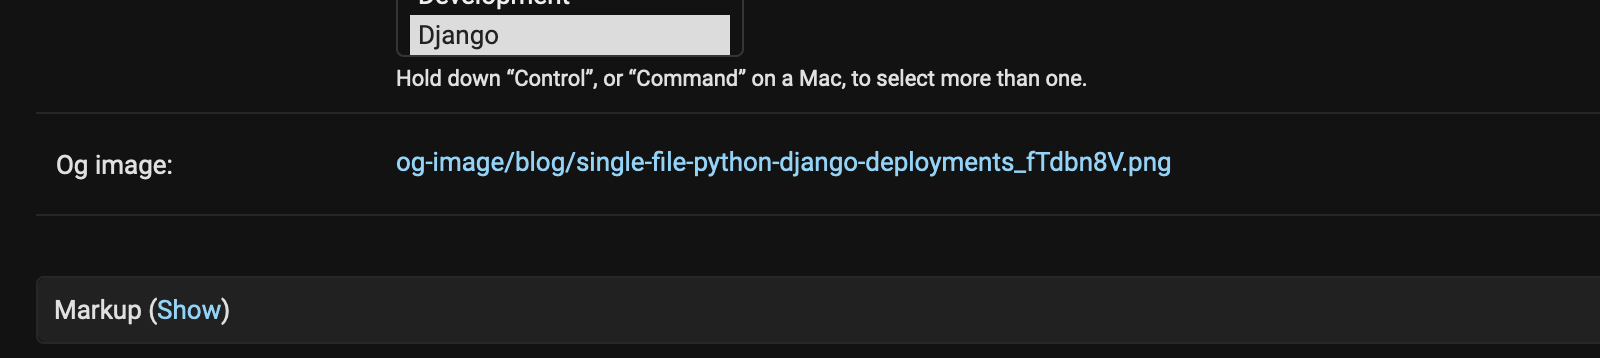 django admin read-only field for our generated image